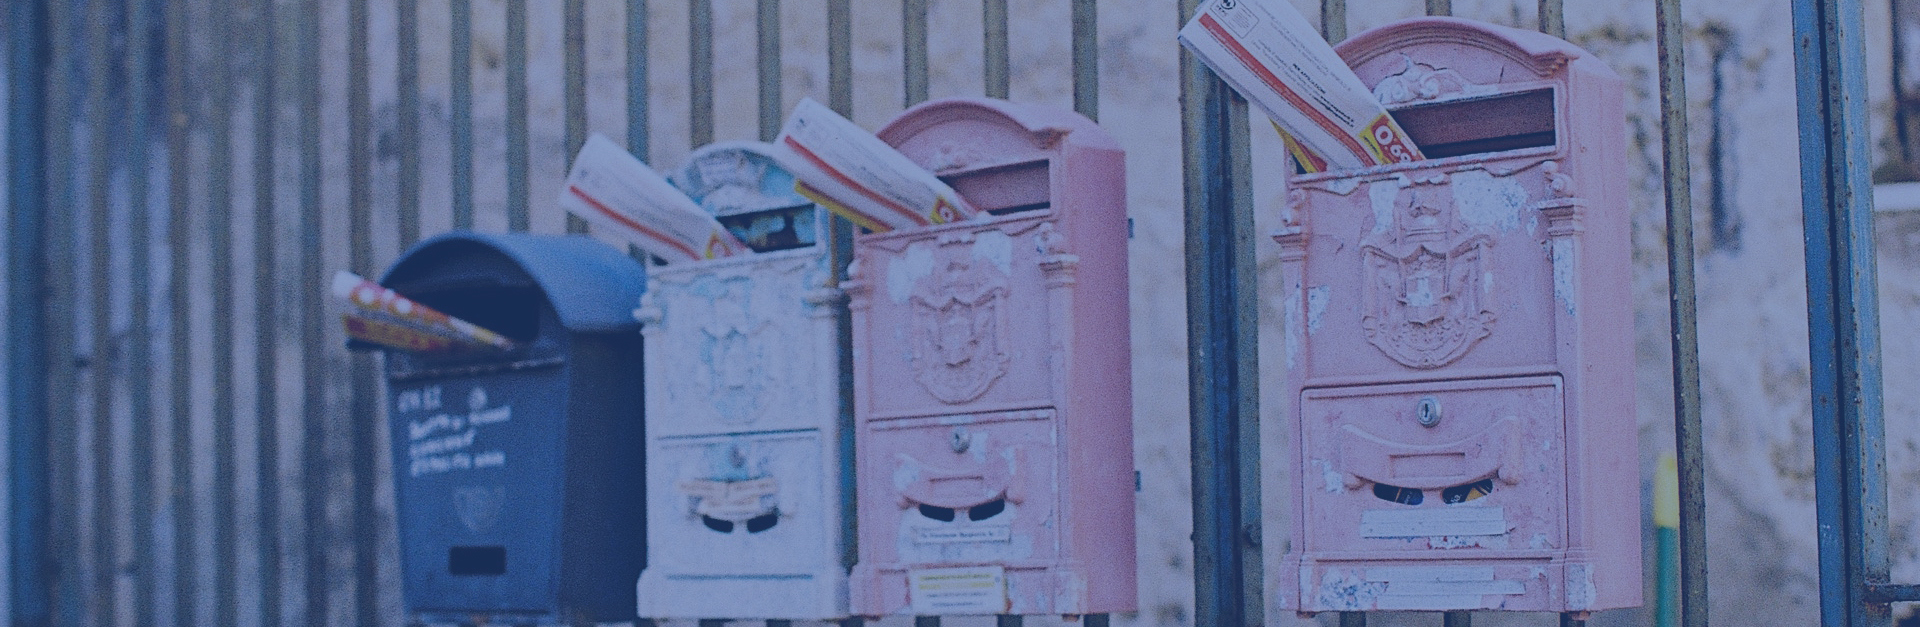 Photo of several mailboxes